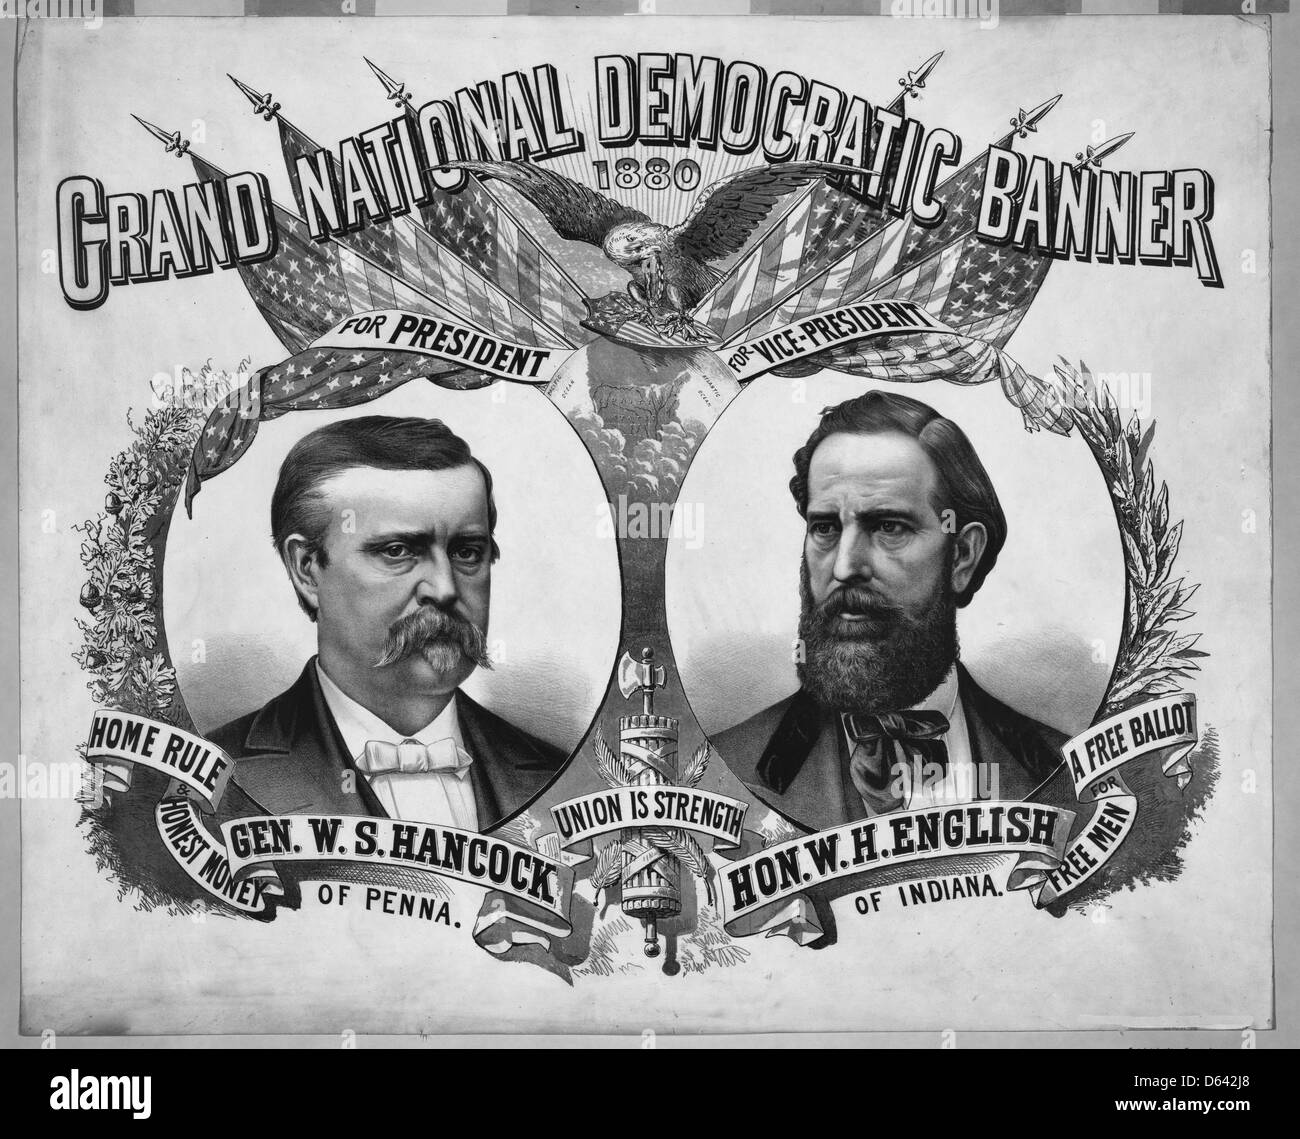 Grand National Democratic Banner, 1880 USA Presidential Election, General W.S. Hancock for President and  W.H. English for Vice President Stock Photo